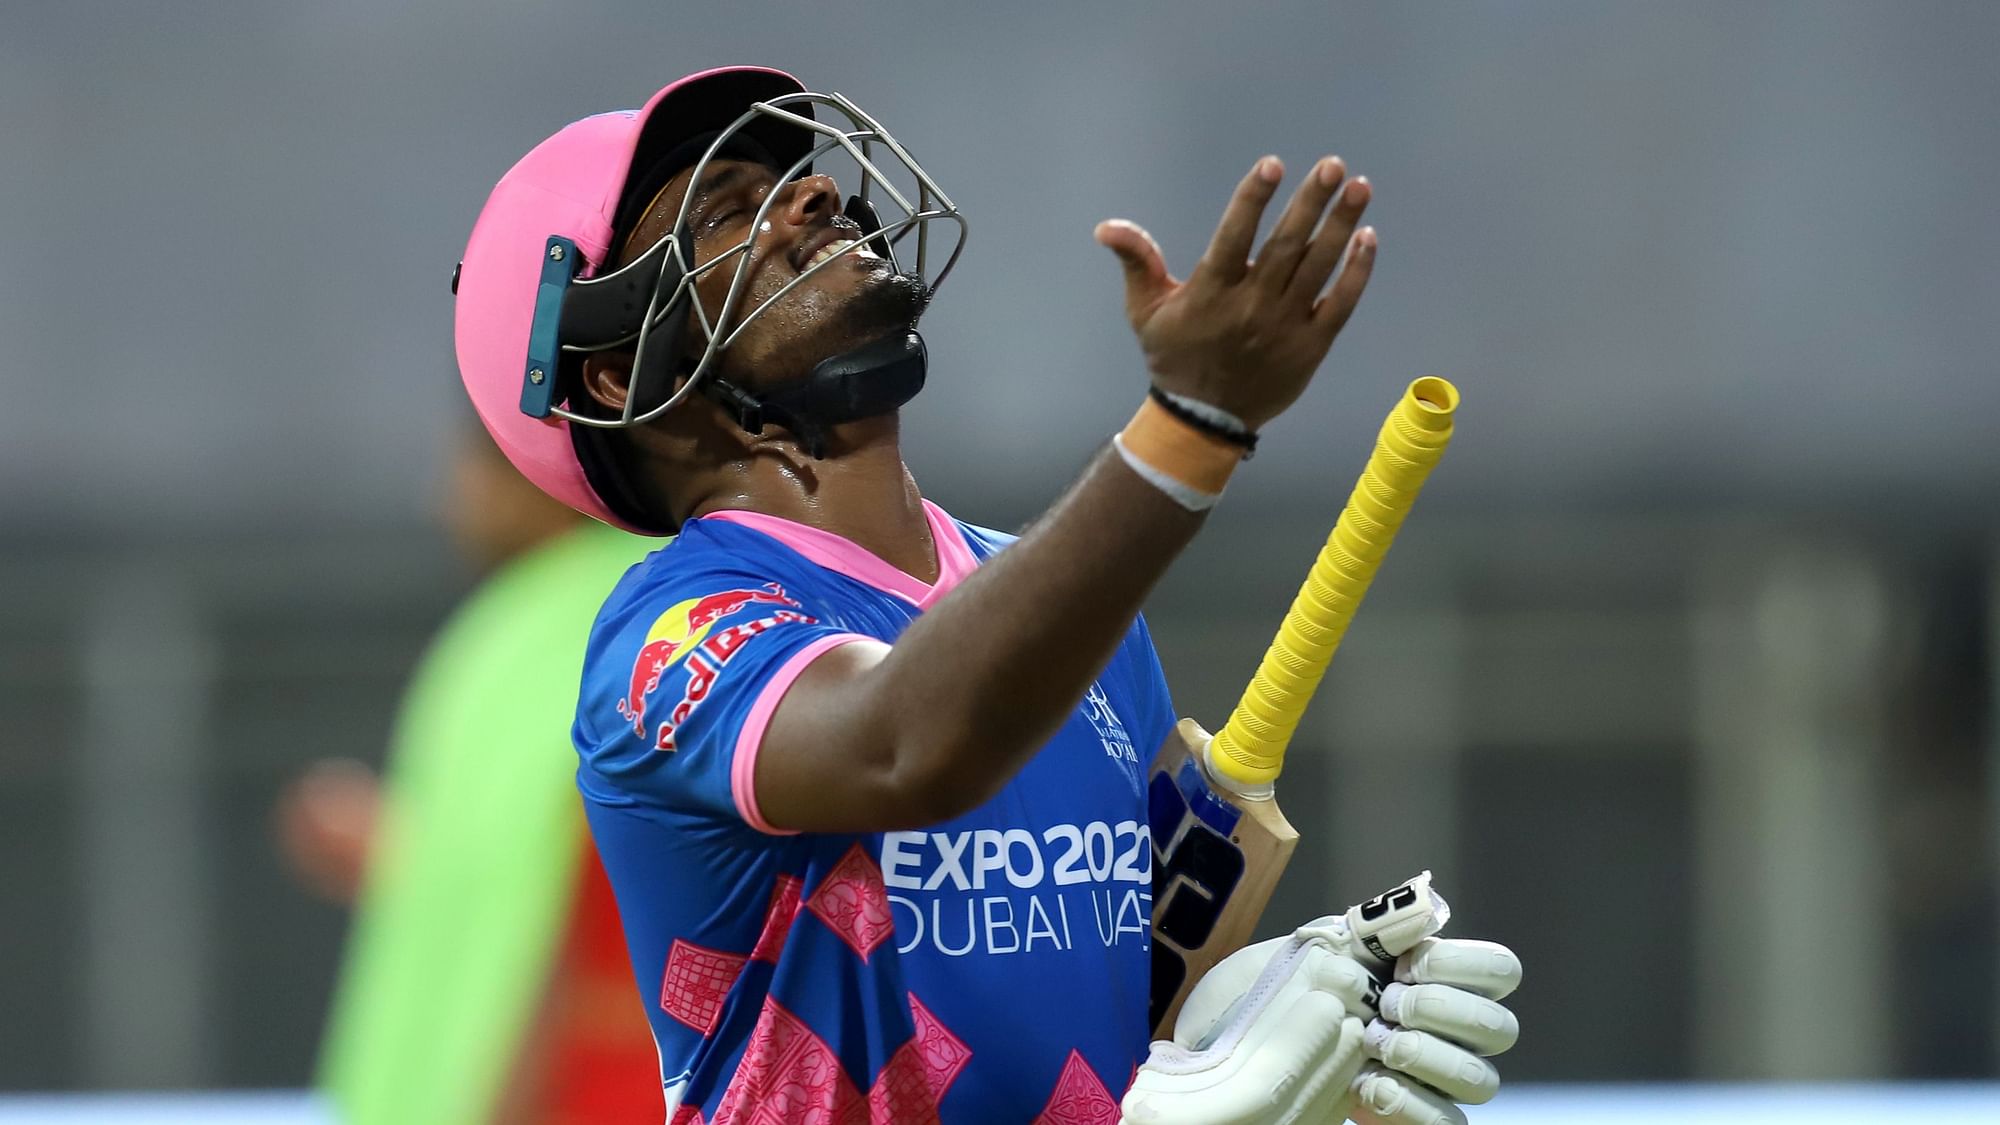 While cricketers applaud Sanju Samson’s century, some on Twitter didn’t appreciate Samson’s decision to not take a run on the second last ball.